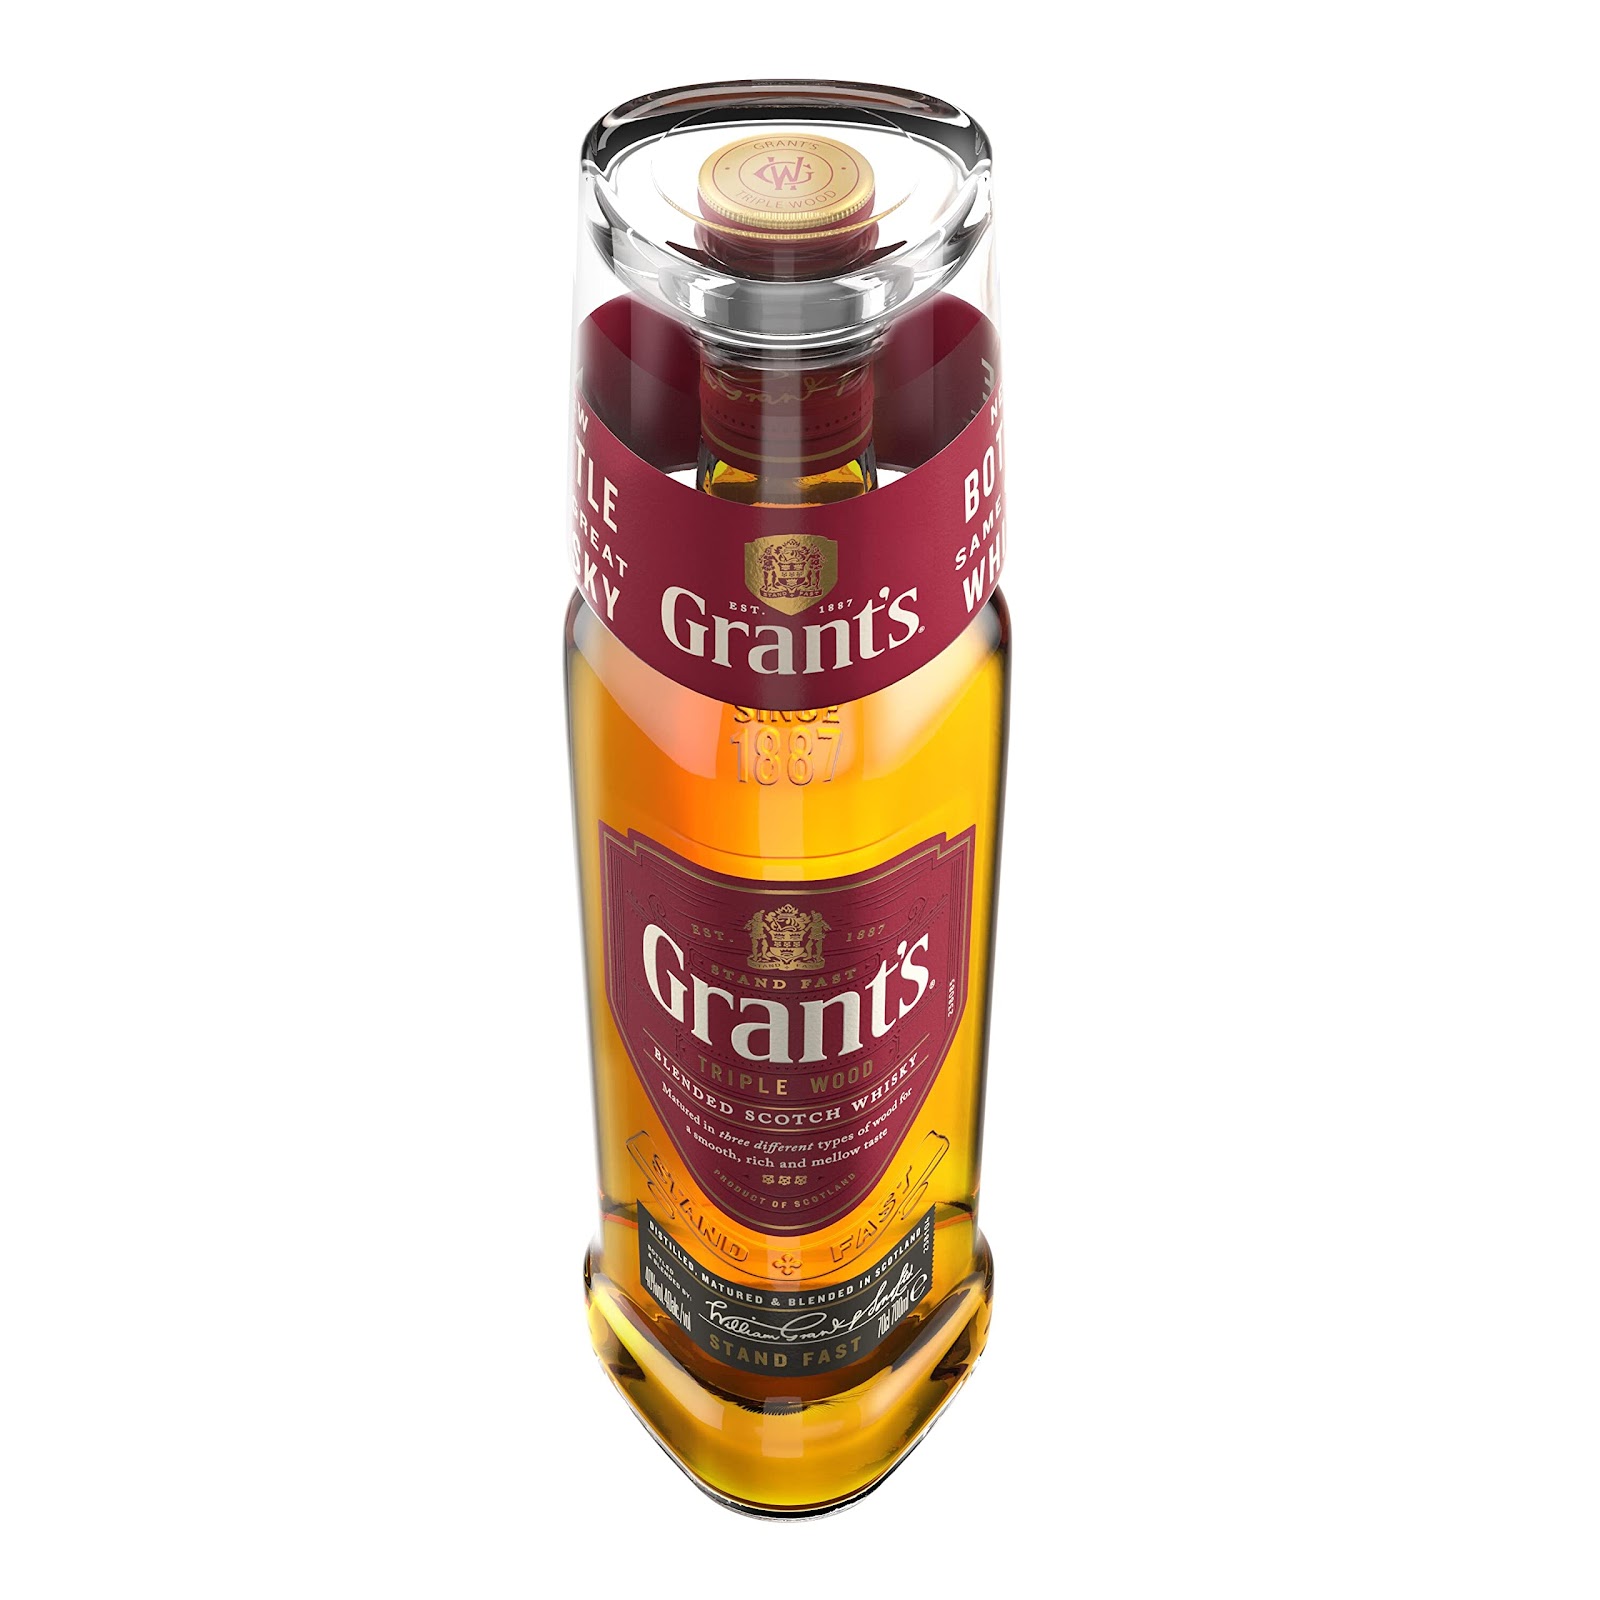 Whisky Grant's Triple Wood 8 anos 1000ml